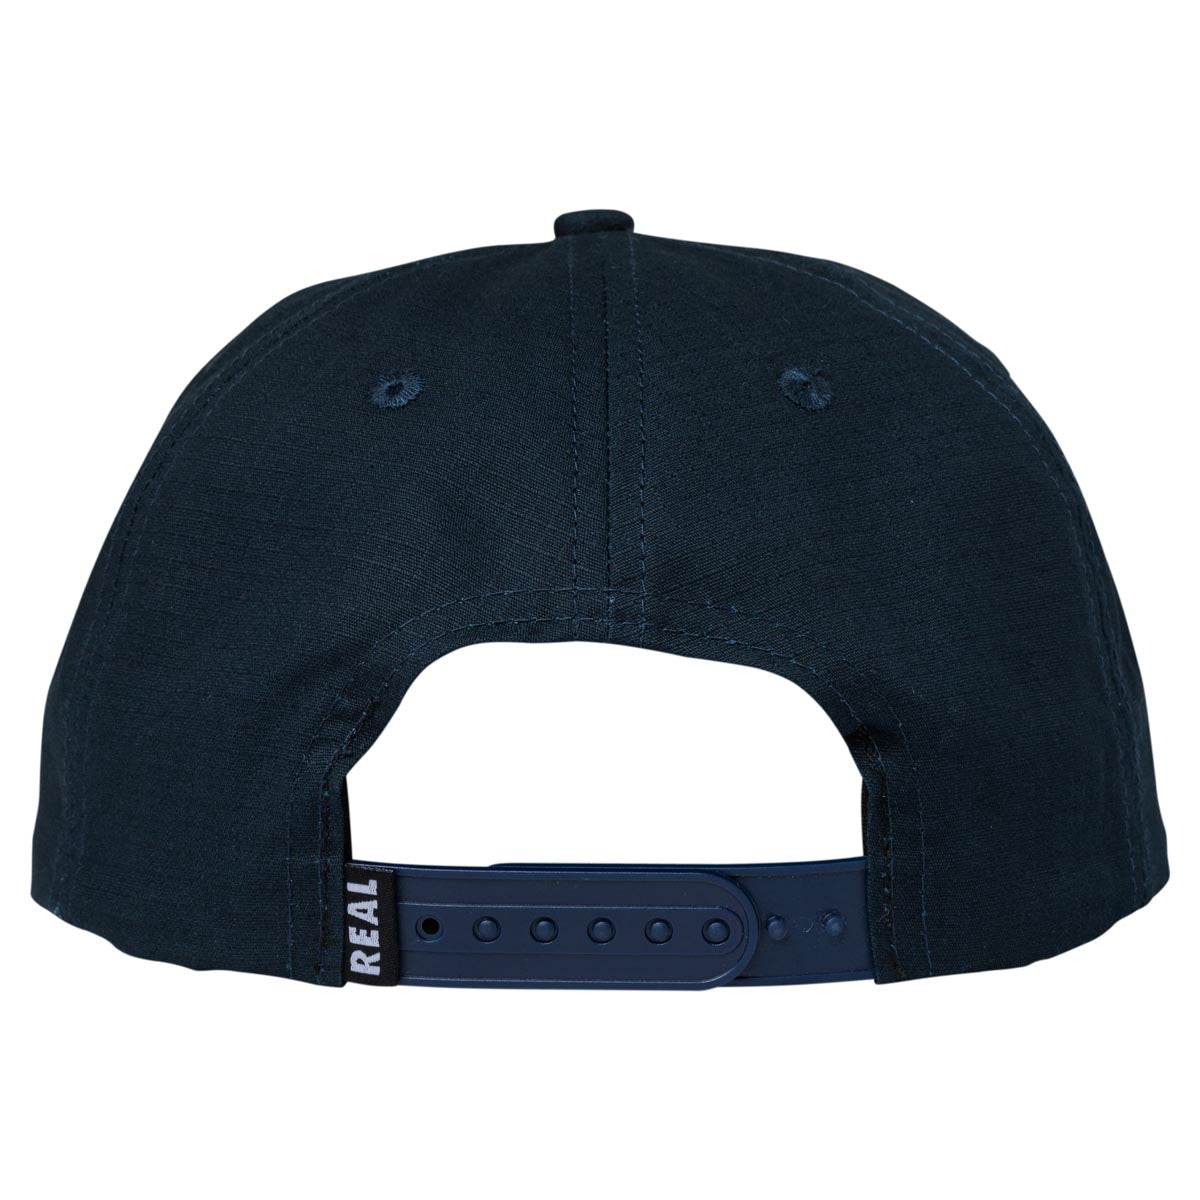 Real Shadow Snapback Hat - Navy/Red image 2